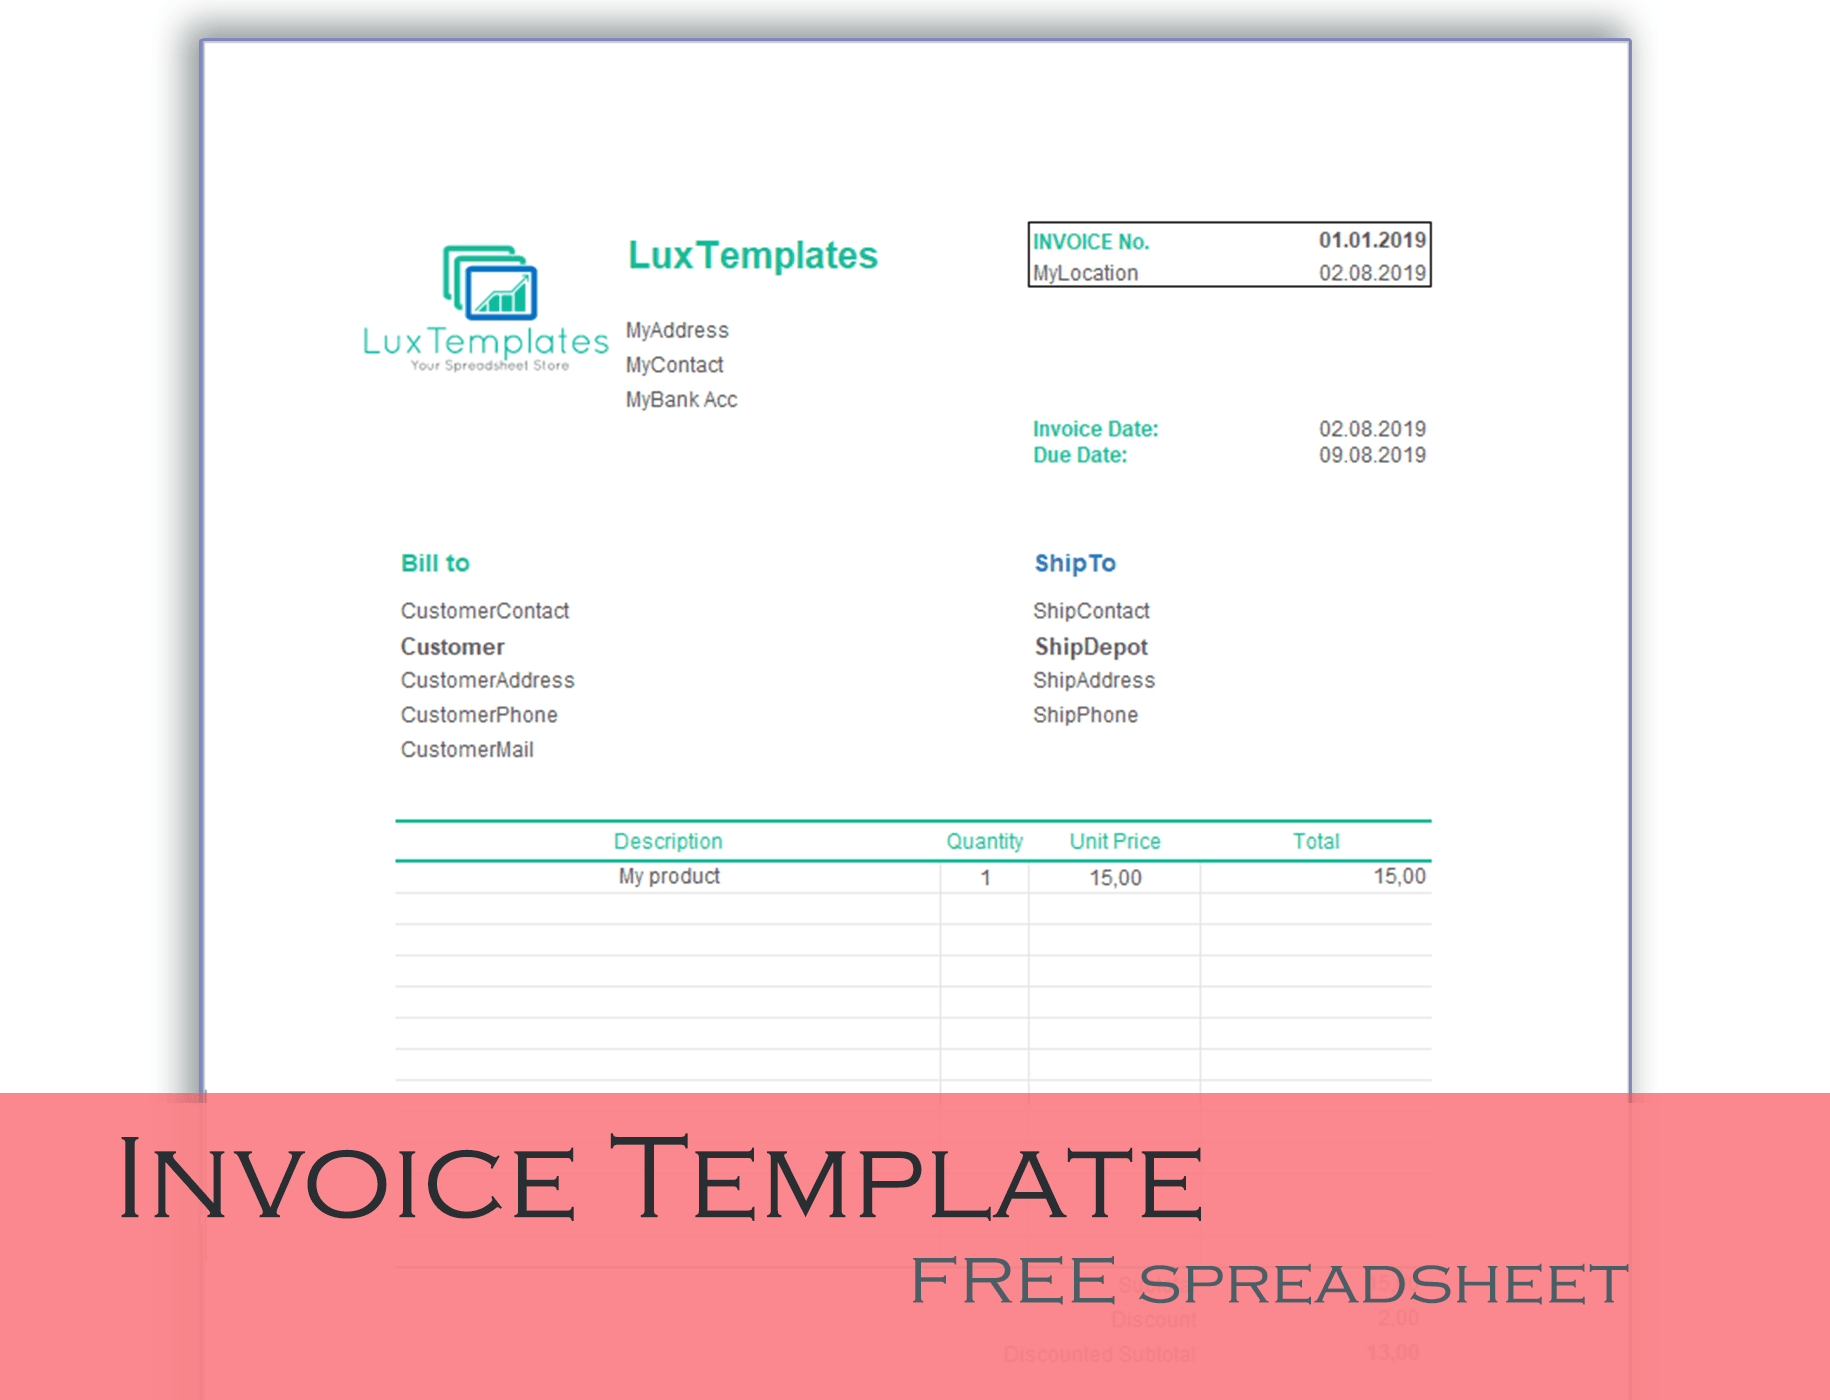 Invoice Templates for Excel - Free Spreadsheet  LuxTemplates For Invoice Tracking Spreadsheet Template